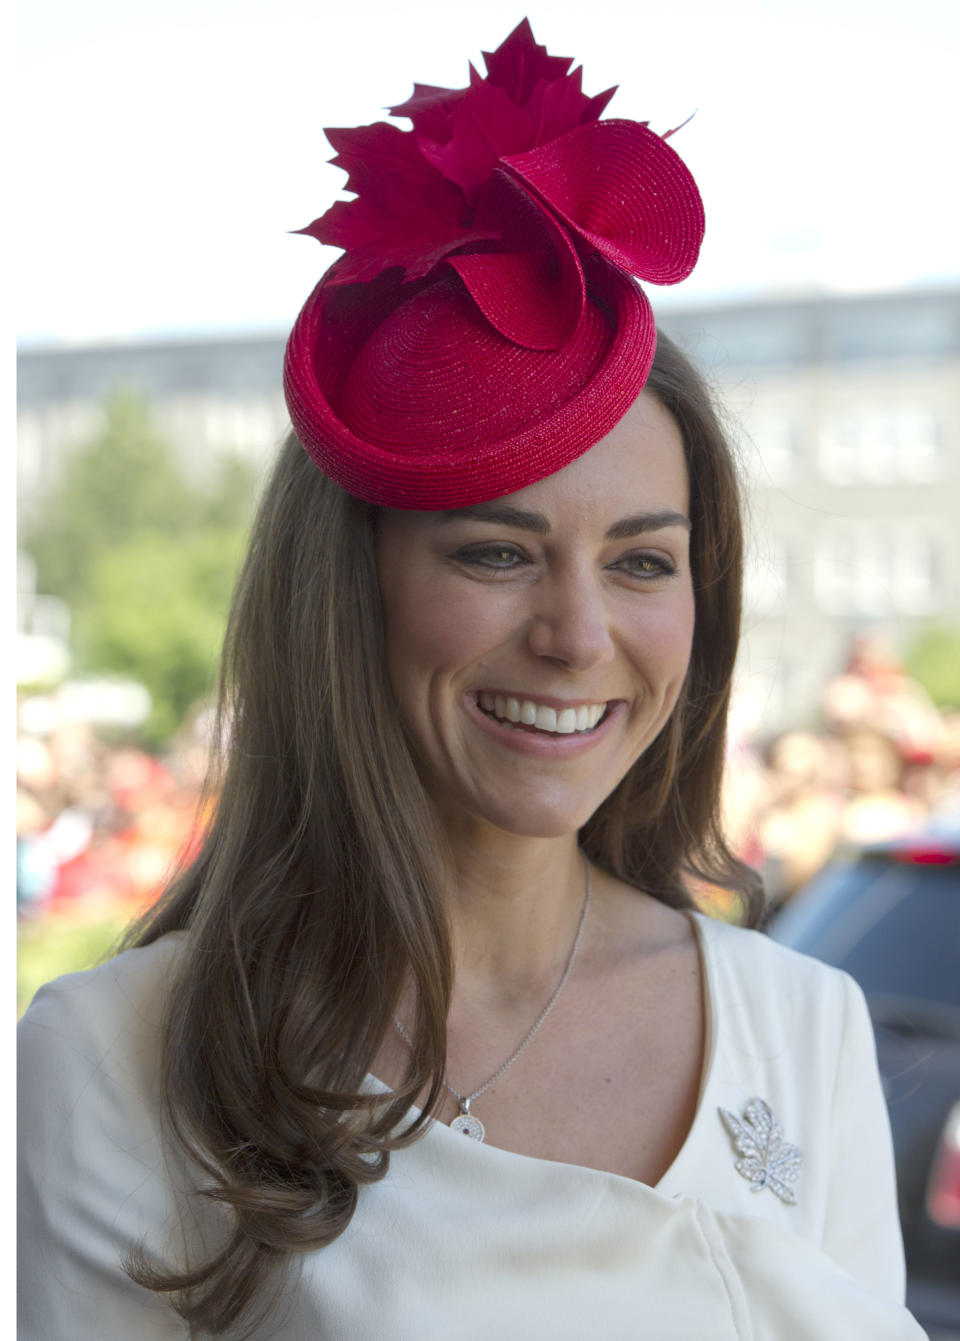 The Duchess of Cambridge visits the Canadian Museum of Civilization to attend a citizenship ceremony on July 1, 2011, in Gatineau, Canada.